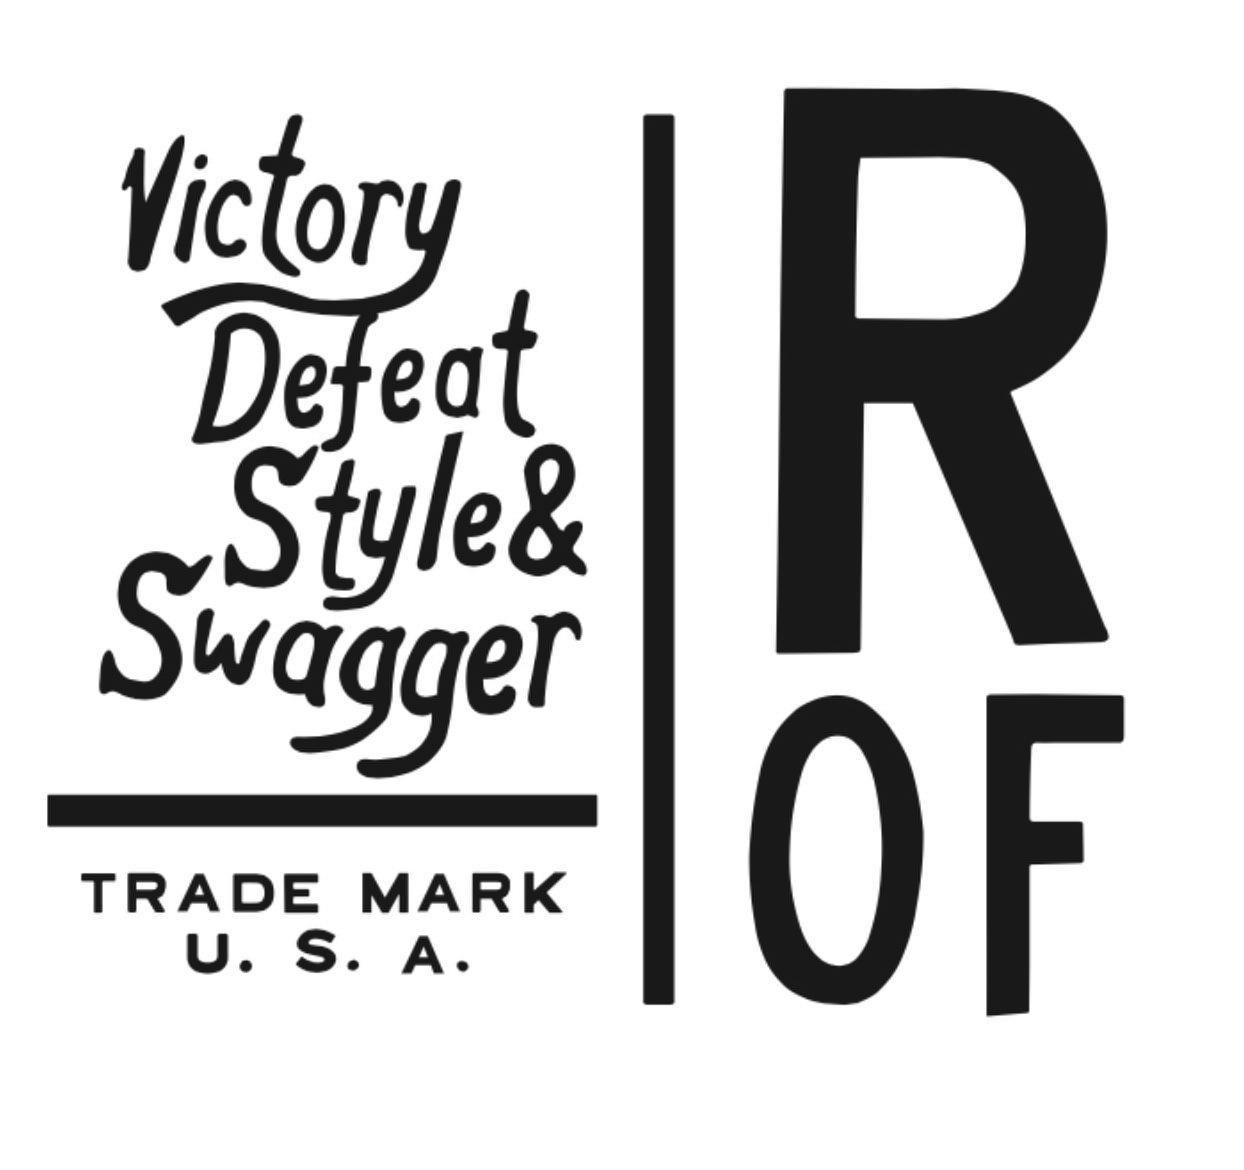  VICTORY DEFEAT STYLE &amp; SWAGGER R OF TRADE MARK U.S.A.